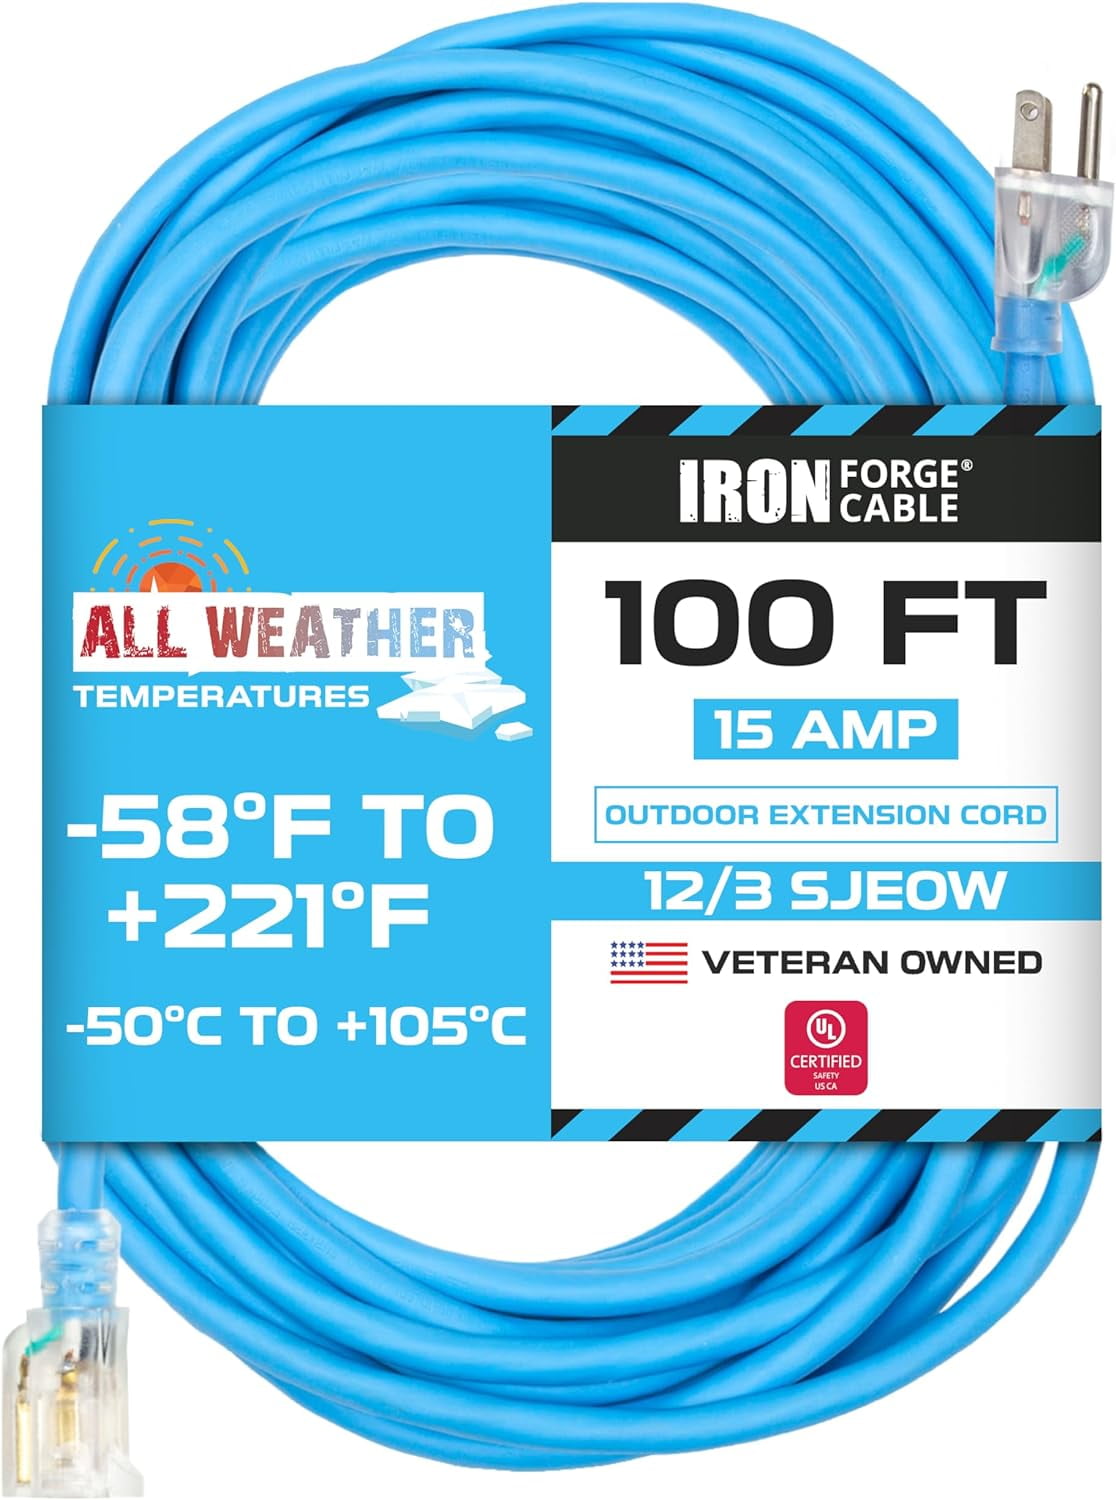 100 Ft All Weather Extension Cord - Stays Flexible in Extreme Temperature 